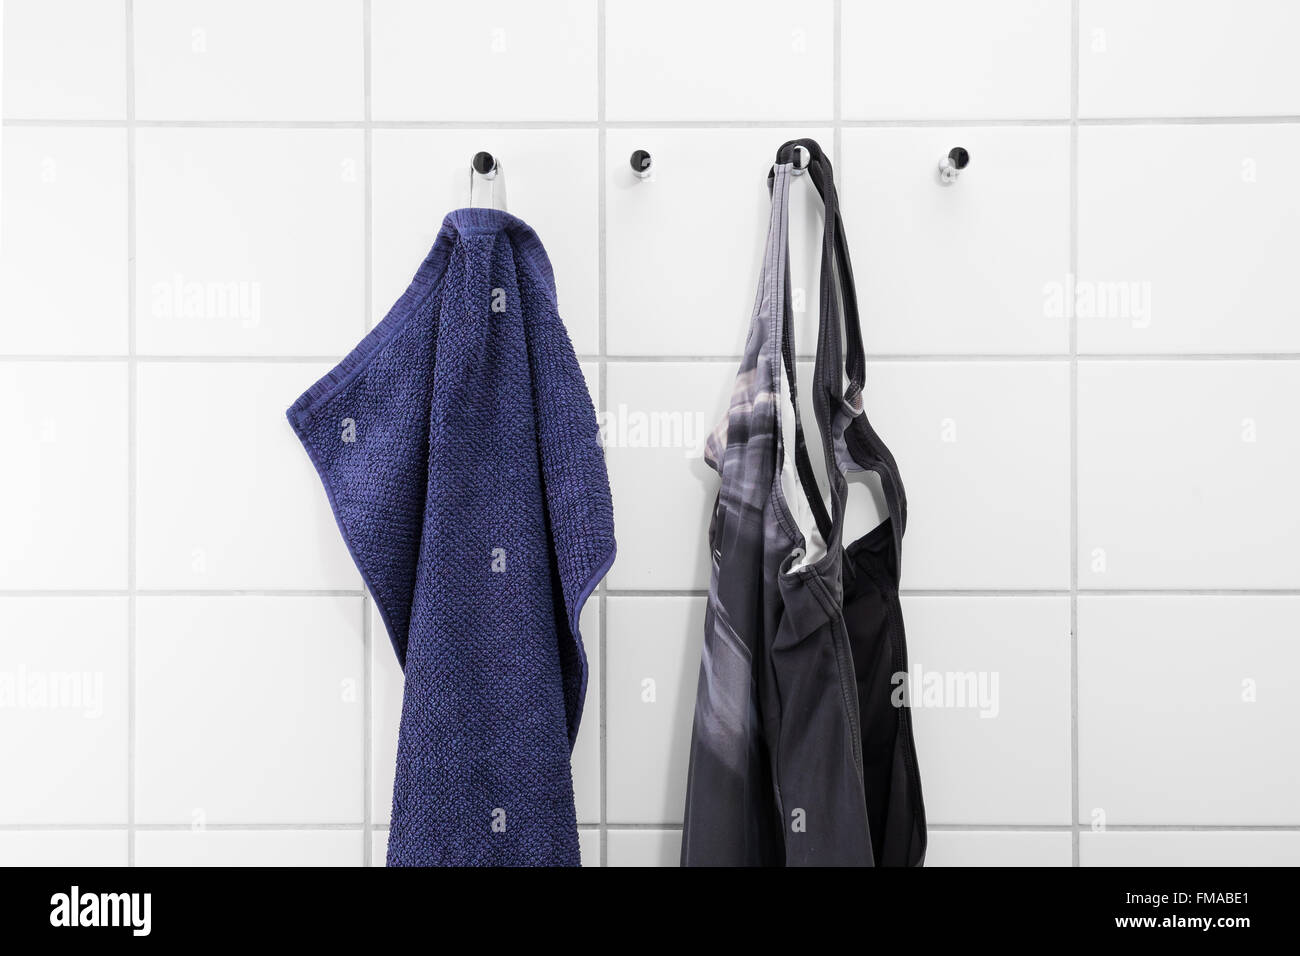 Towel and swimsuit hanging on a white tile wall of a changing room at a swimming bath Stock Photo